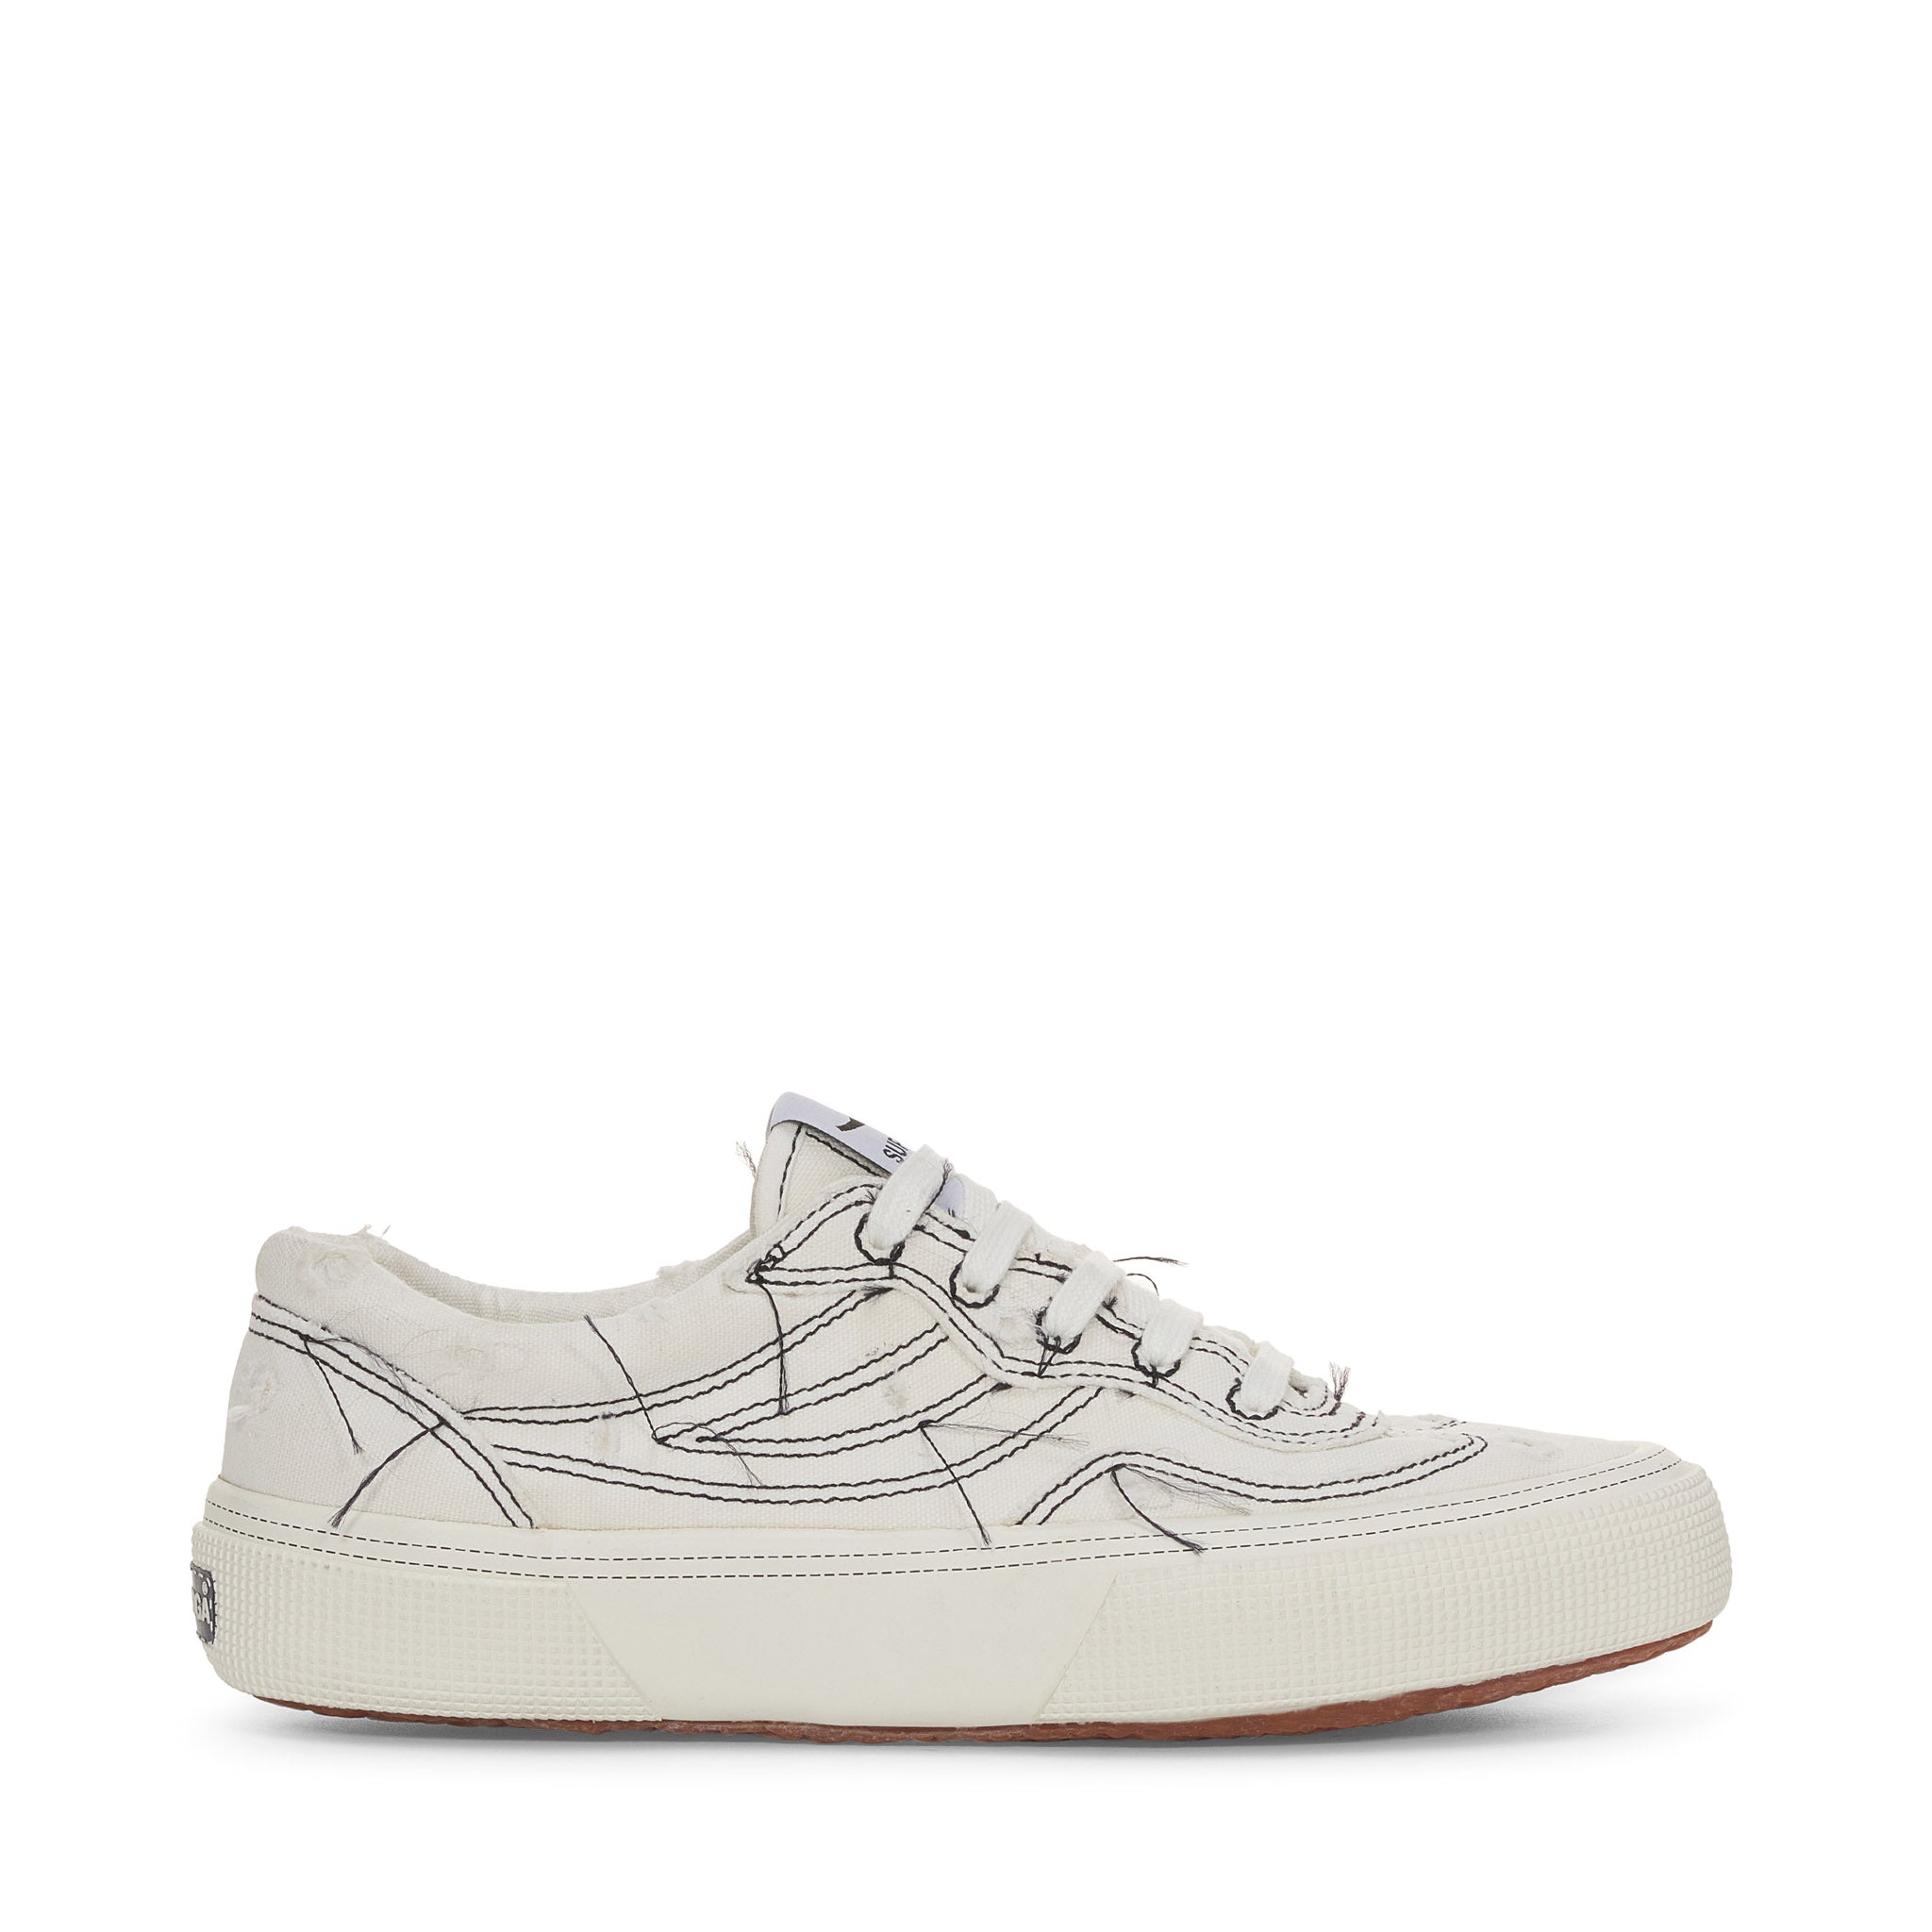 Superga 2941 Revolley Distressed Stone Washed Sneakers - White Avorio Black. Side view.